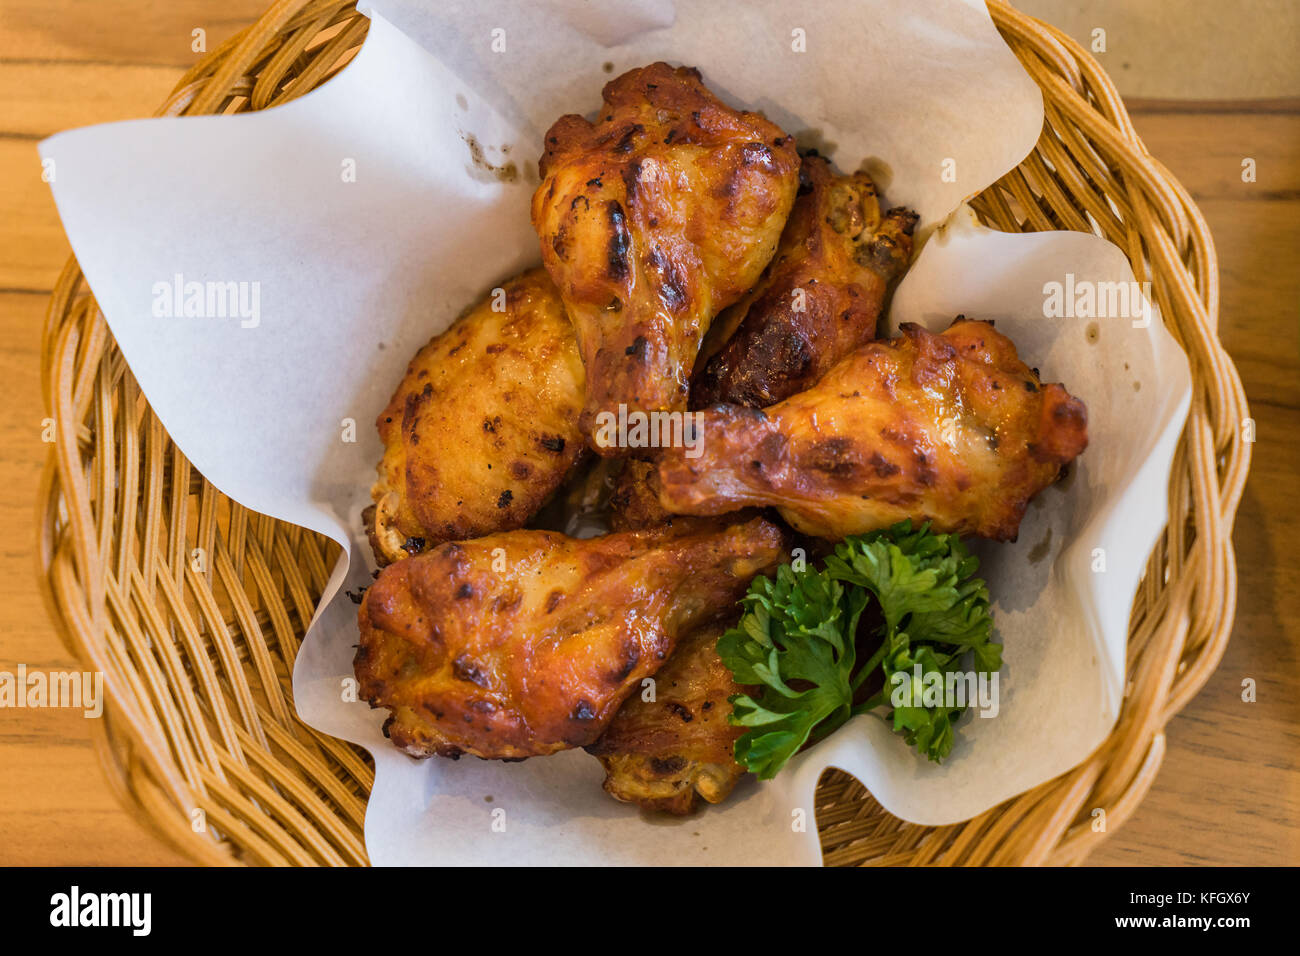 Thai fried chickens Hot and Spicy in basket on wooden table Stock Photo